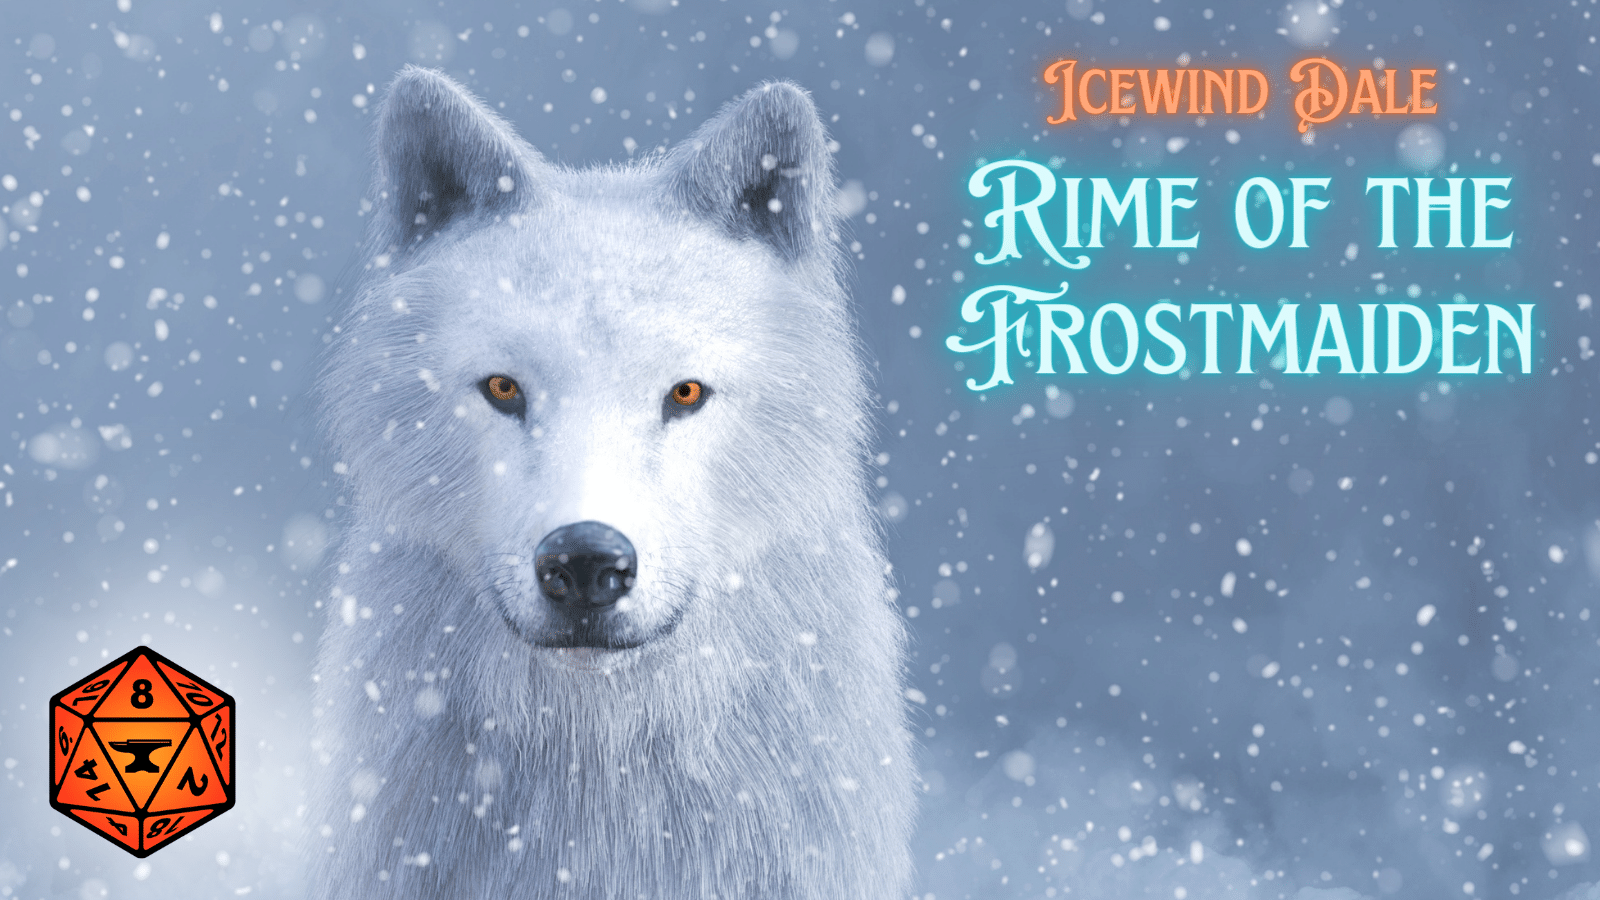 Tame the Northlands - Icewind Dale: Rime of the Frostmaiden